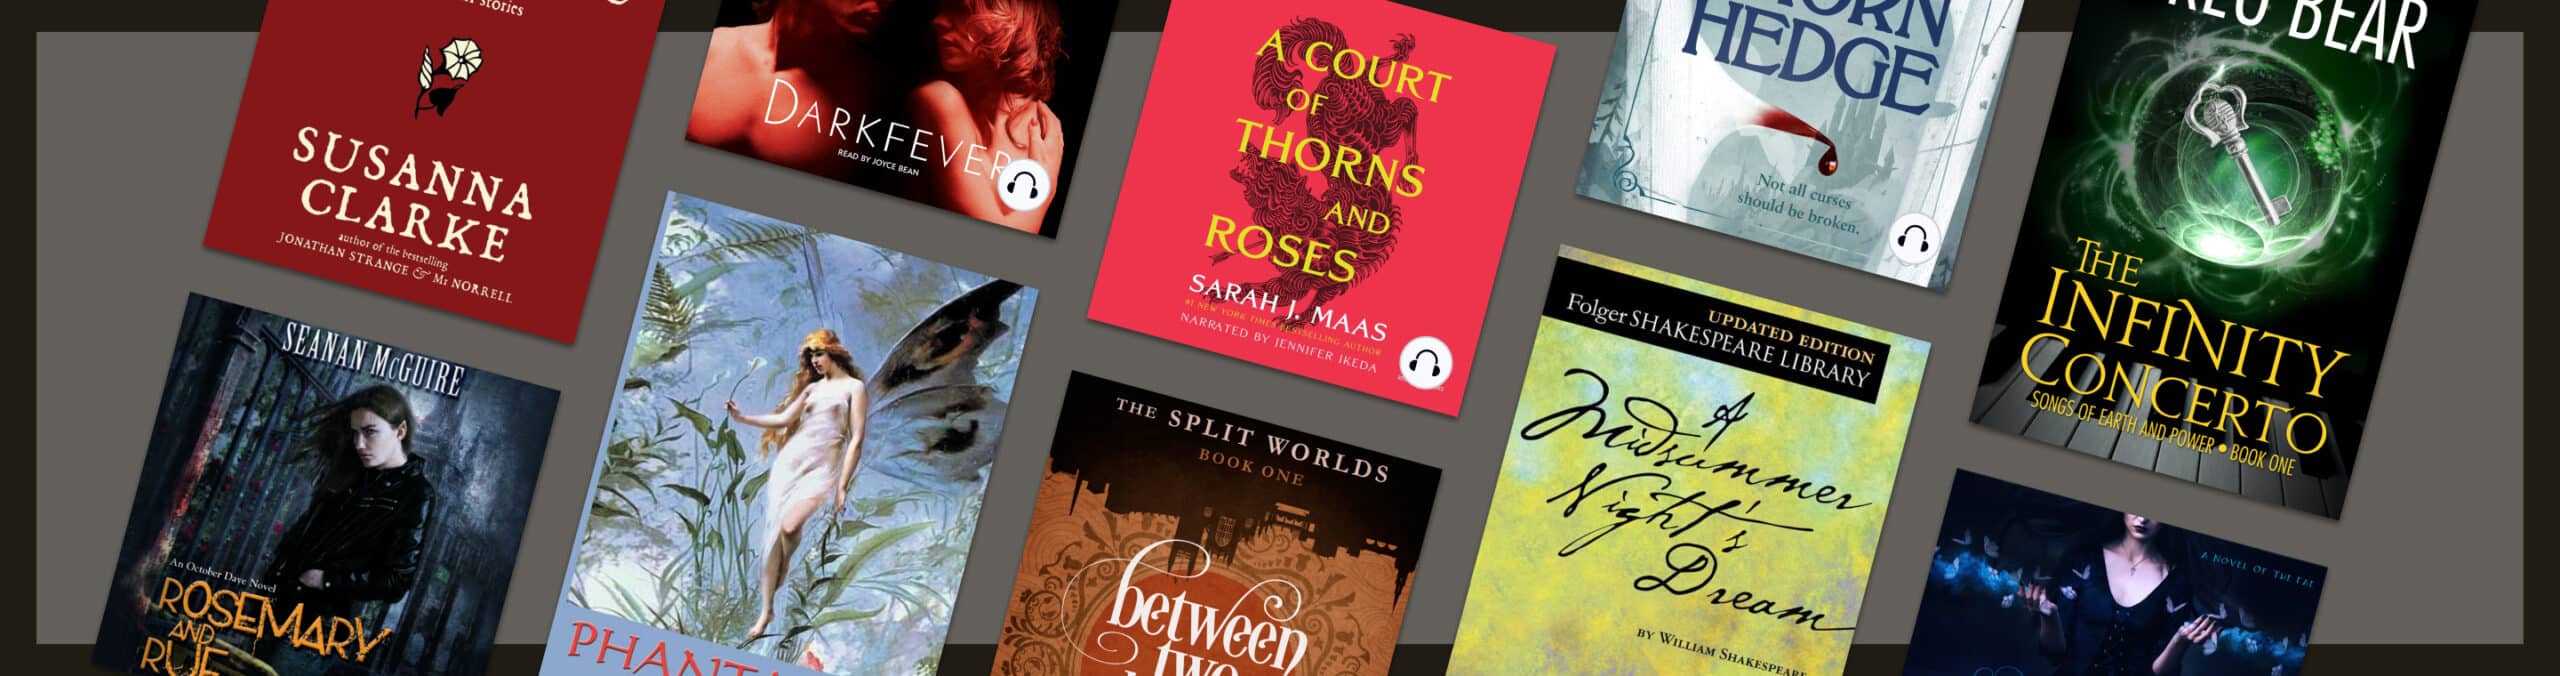 11 of the best books about fairies for fantasy-loving adults